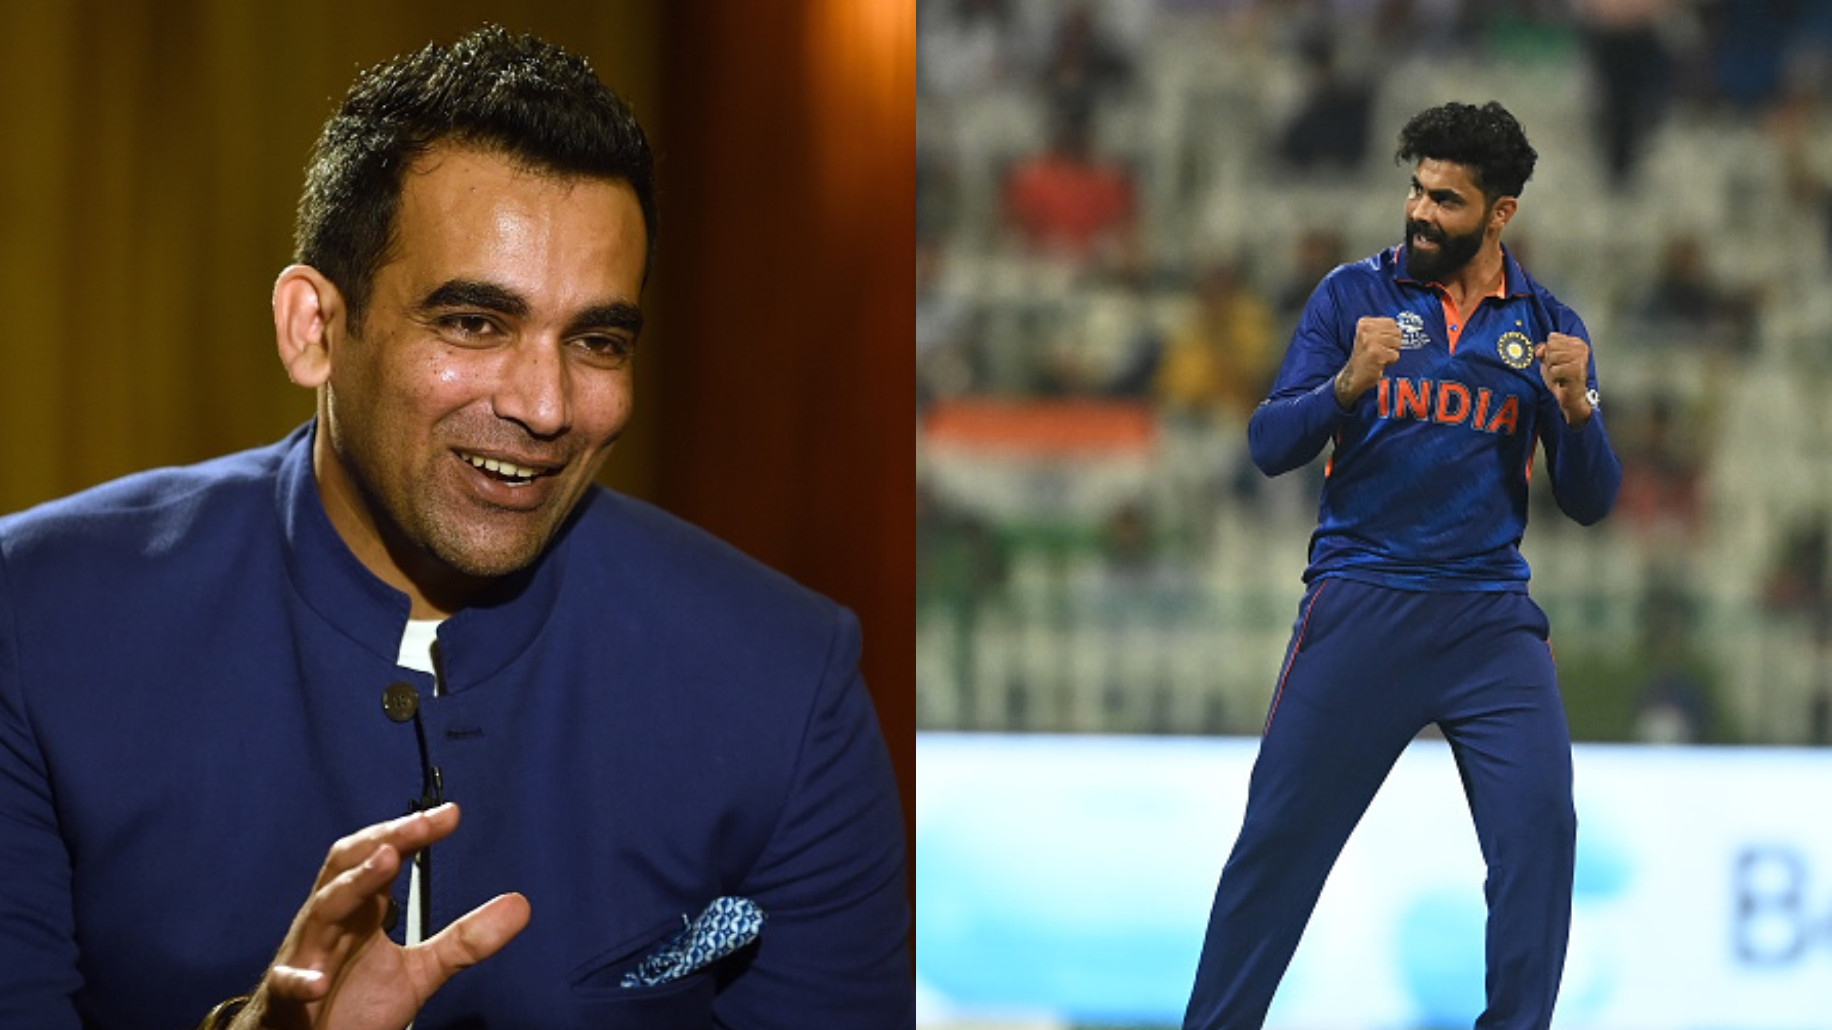 “Can Jadeja bat at no. 6?”: Zaheer Khan suggests a unique playing combination for Team India